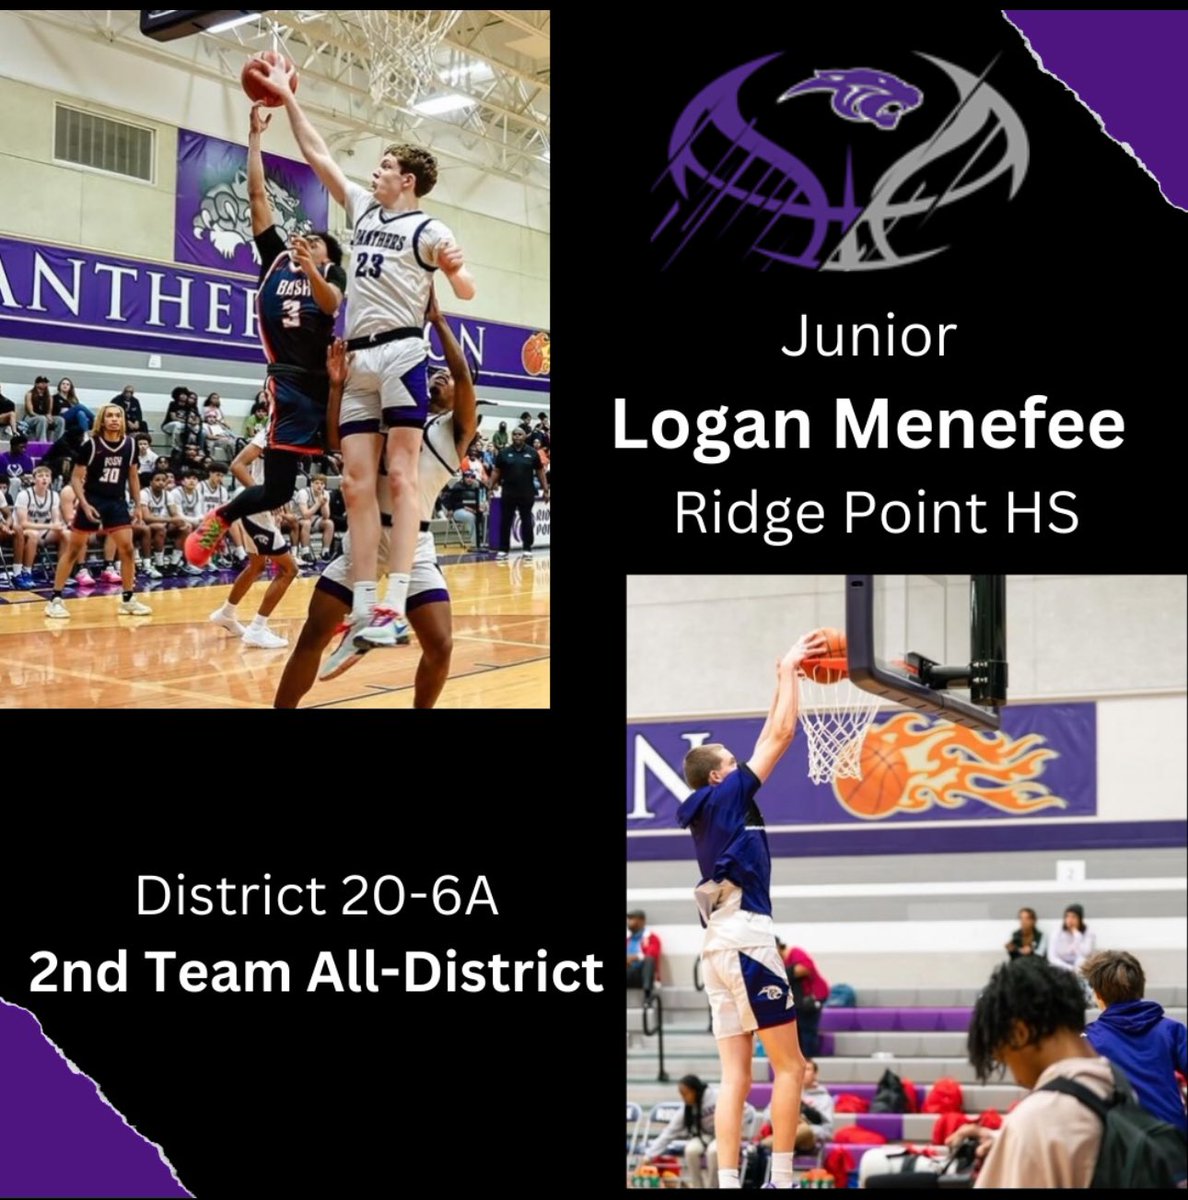 Congratulations @loganmenefee on named 2nd Team All-District. Great honor for having a good year. #Brotherhood #C>S #TGW